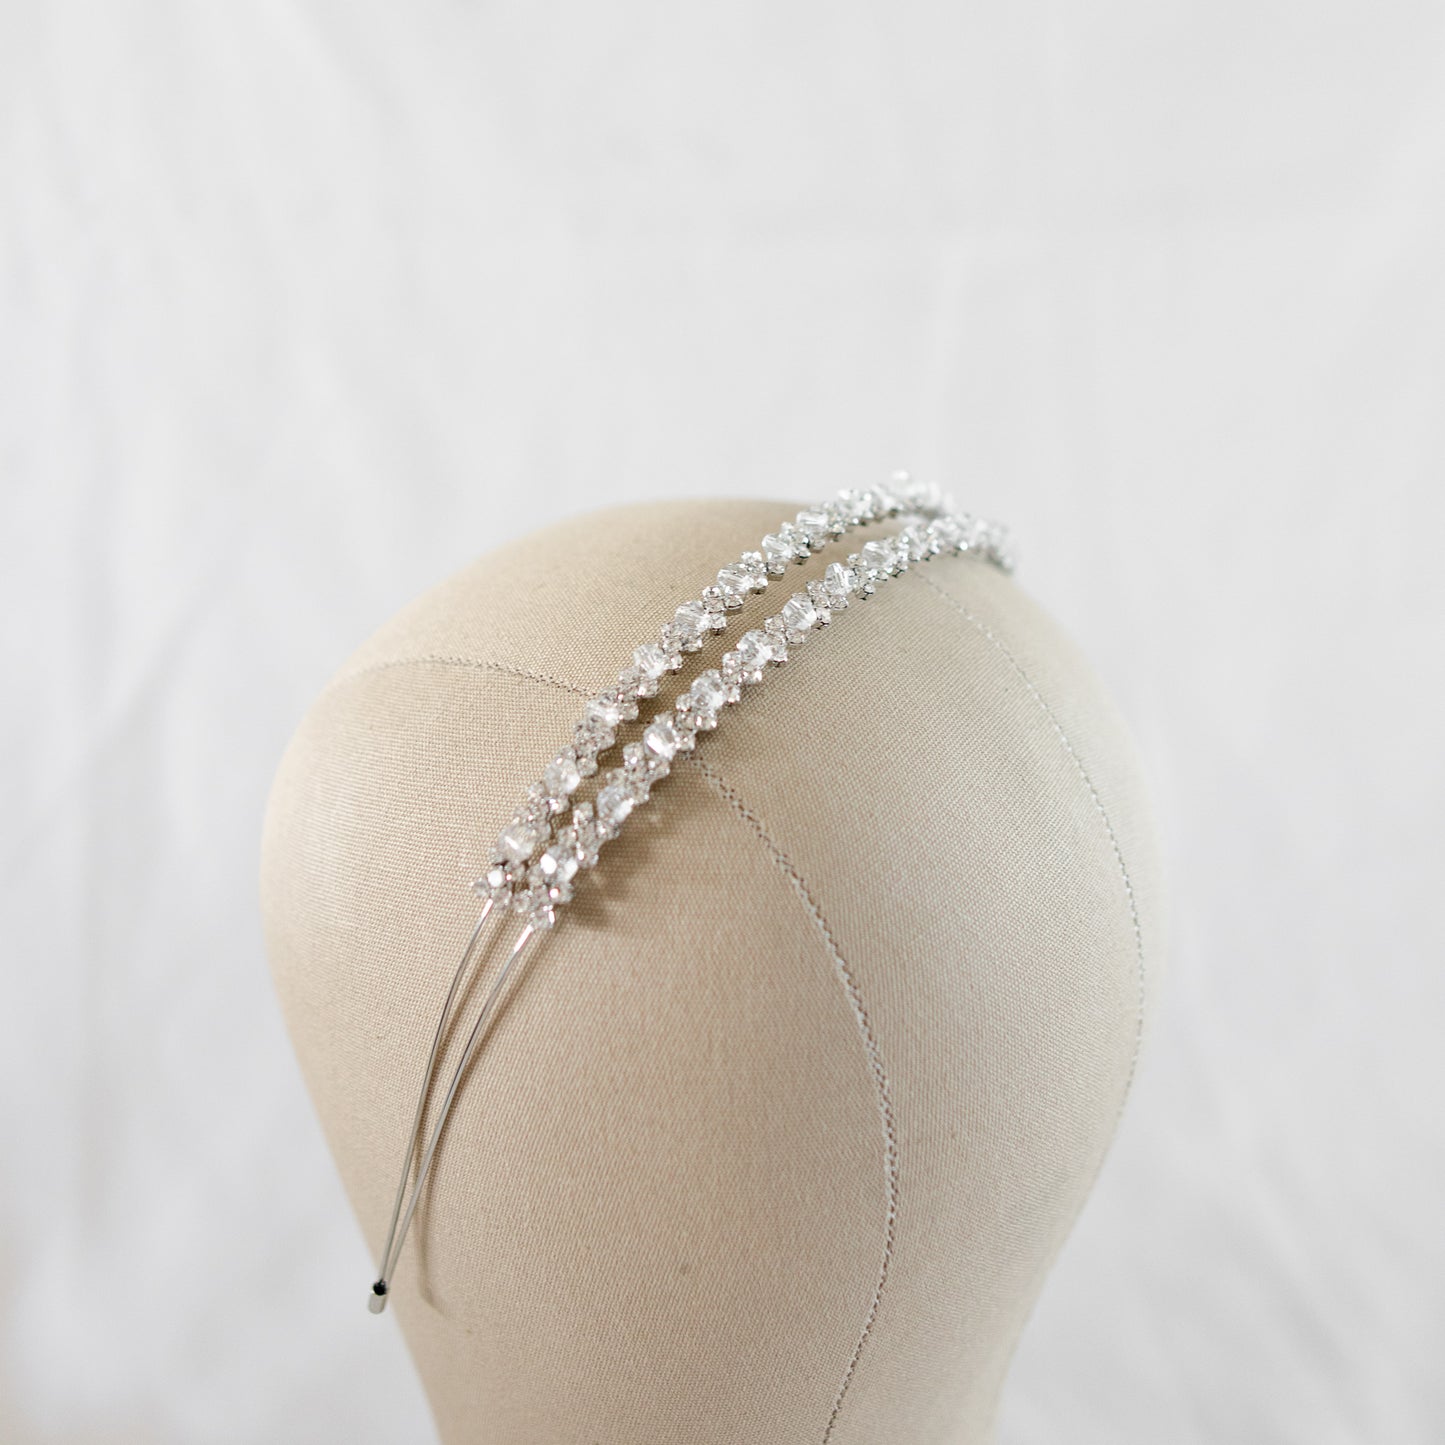 White headband with sparkling crystal beads